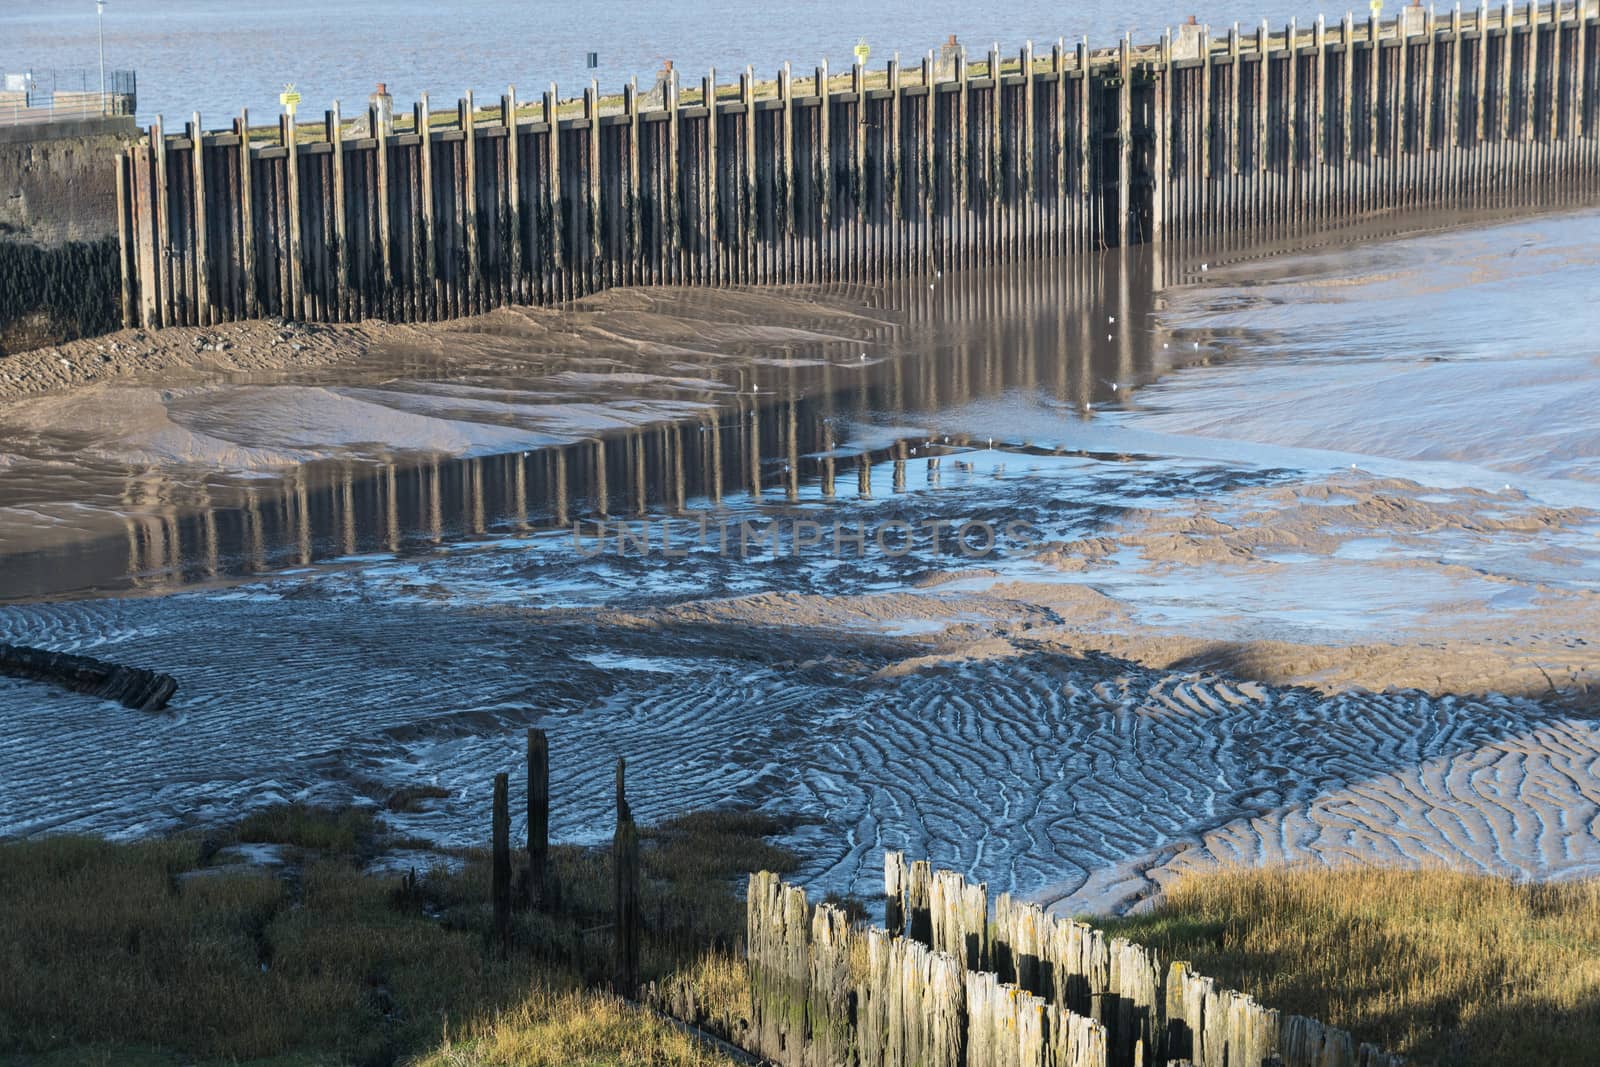 Reflections in the mudflats of a disused jetty